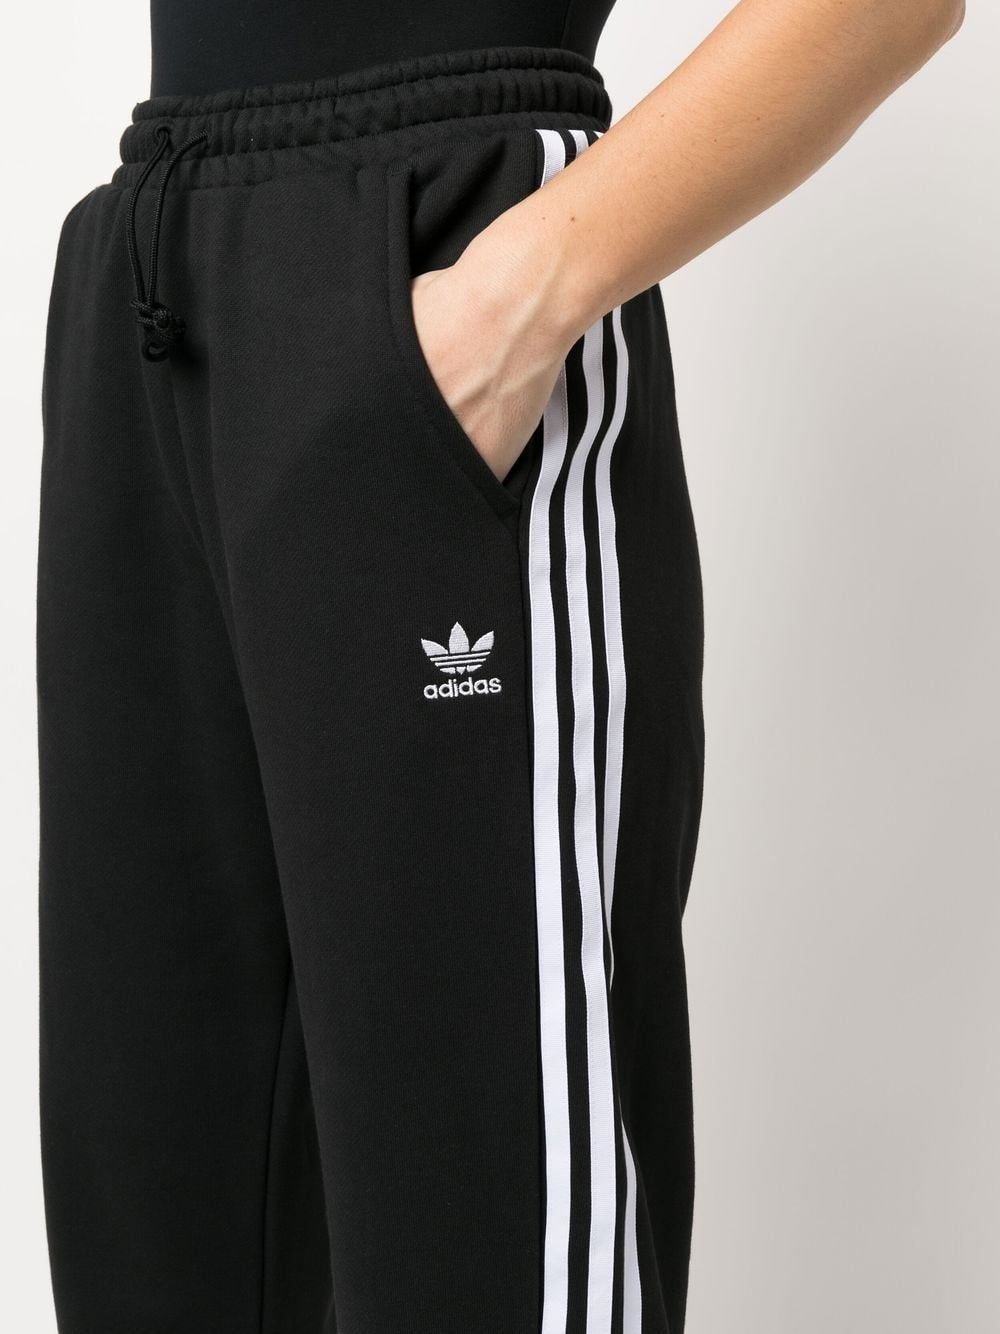 embroidered-logo detail track pants - 5